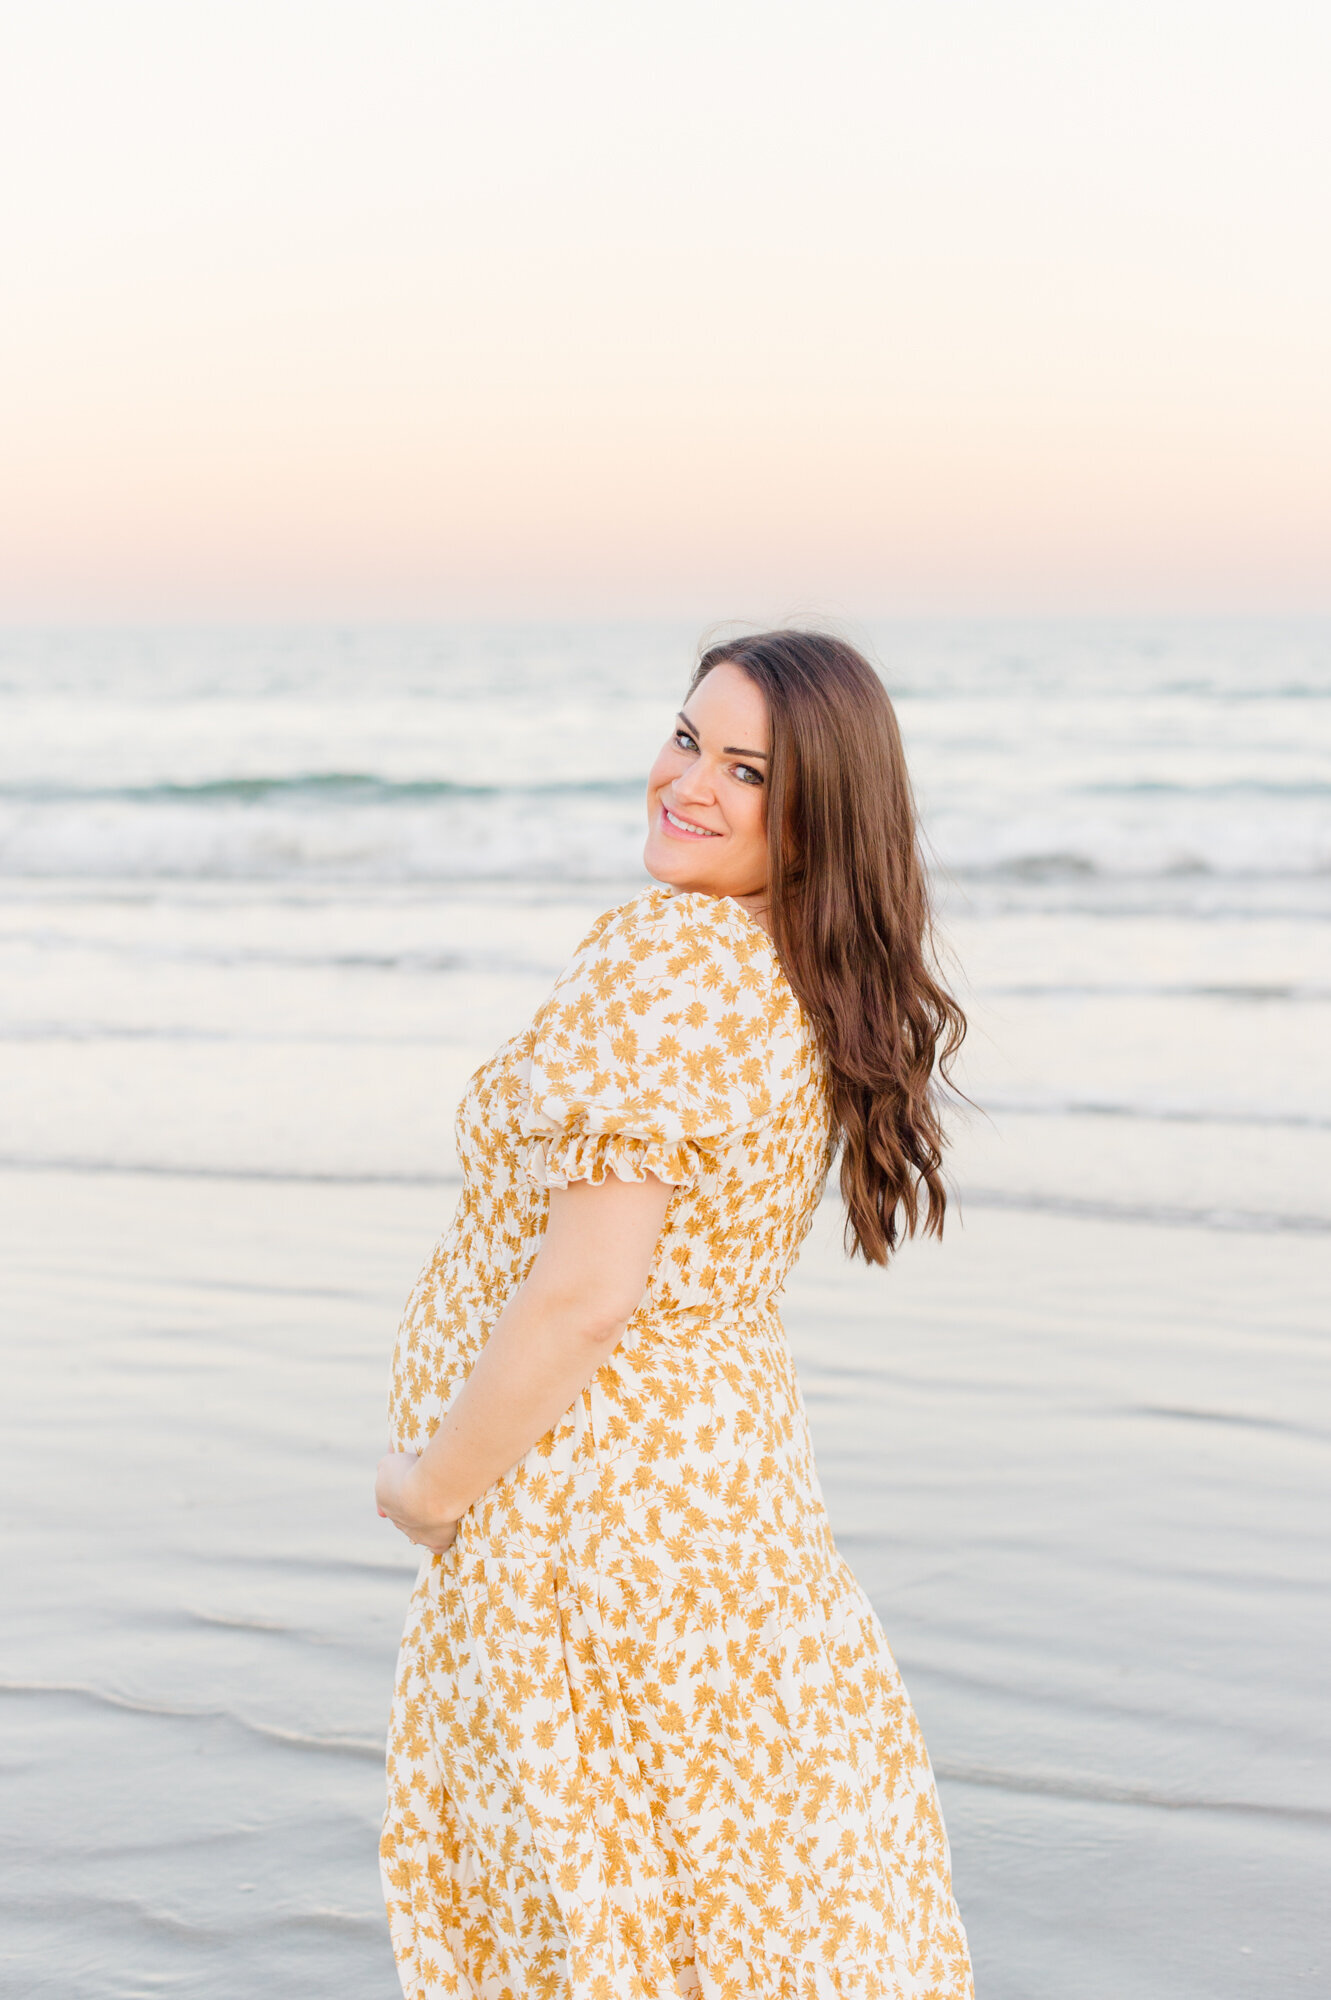 Pregnant mother standing on Melbourne Beach standing near the shoreline wearing a yellow dress and holding her belly.